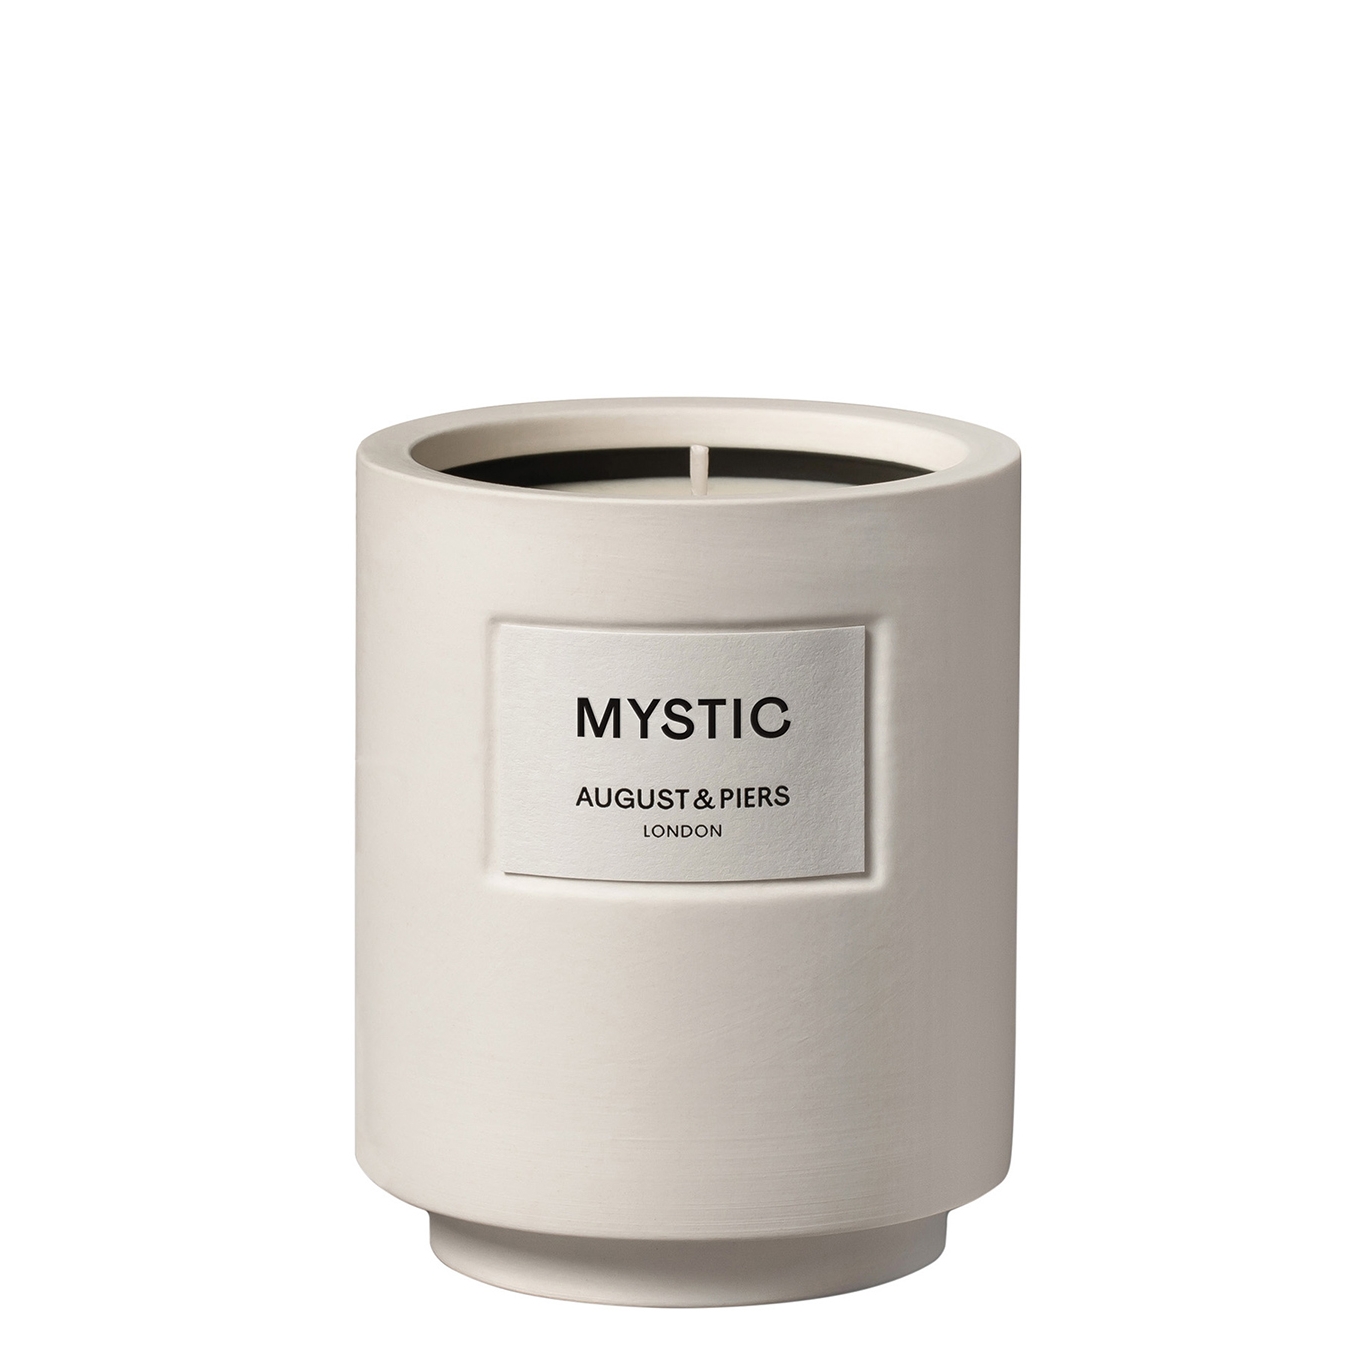 August & Piers Mystic Scented Candle 340g